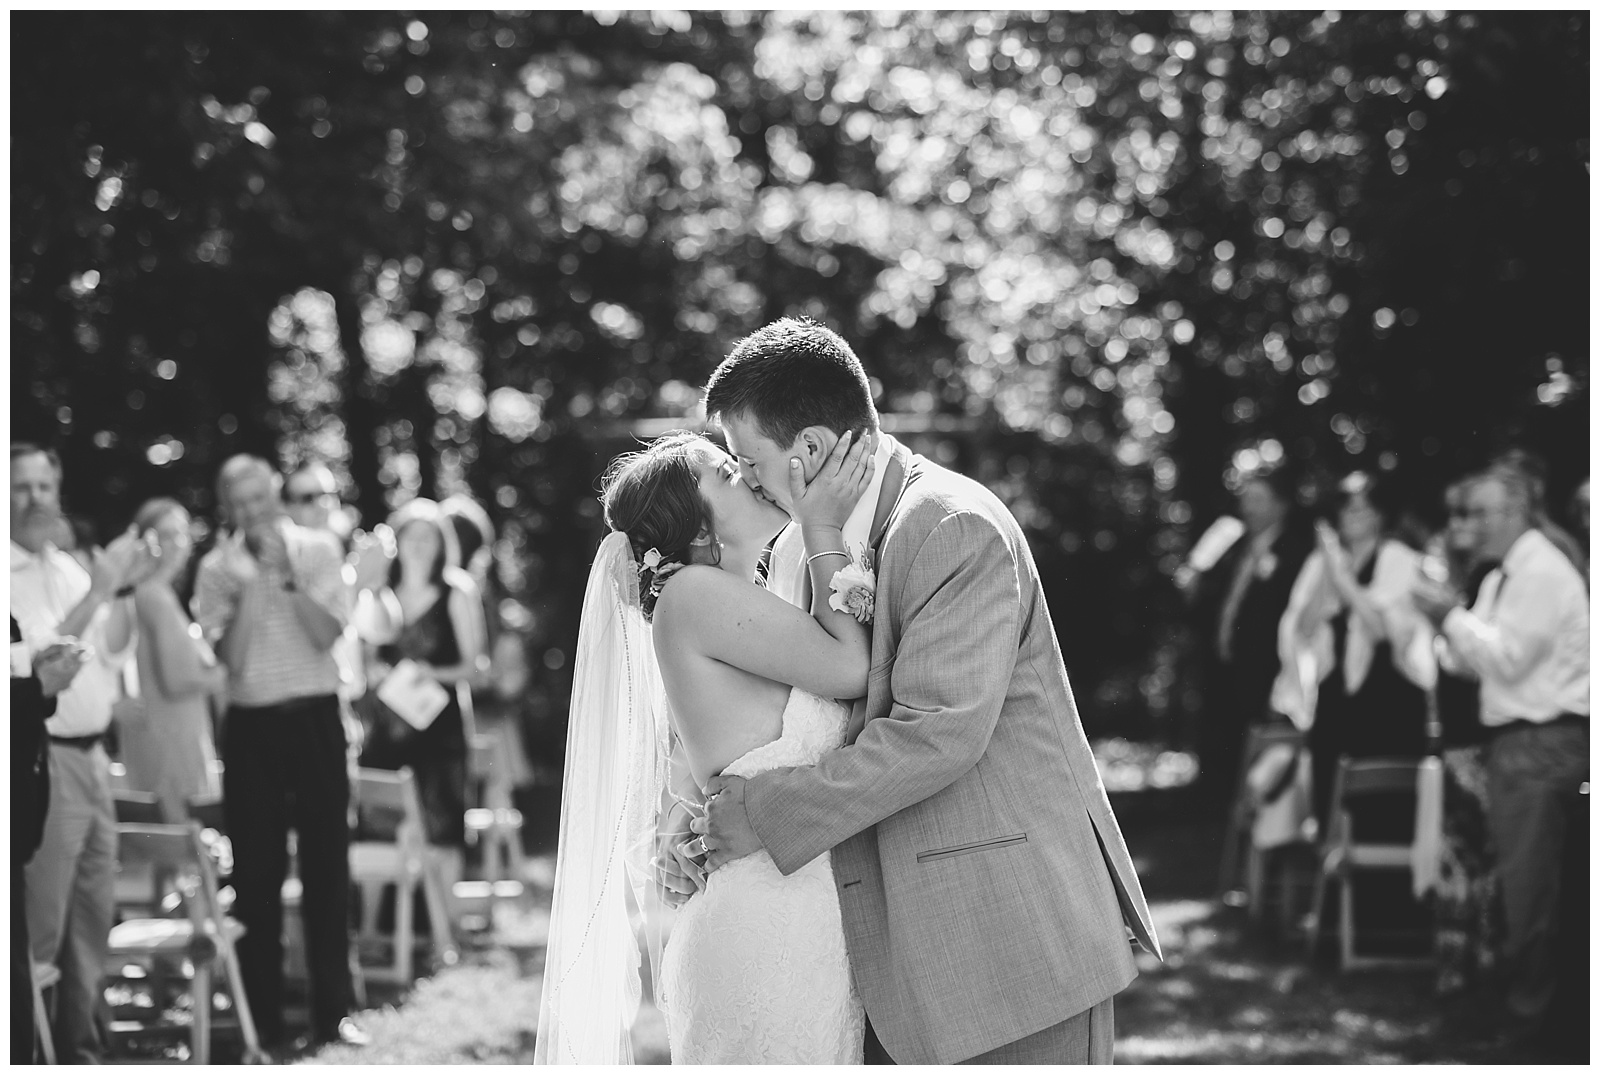 One Year Anniversary | Monica Brown Photography | monicabrownphoto.com